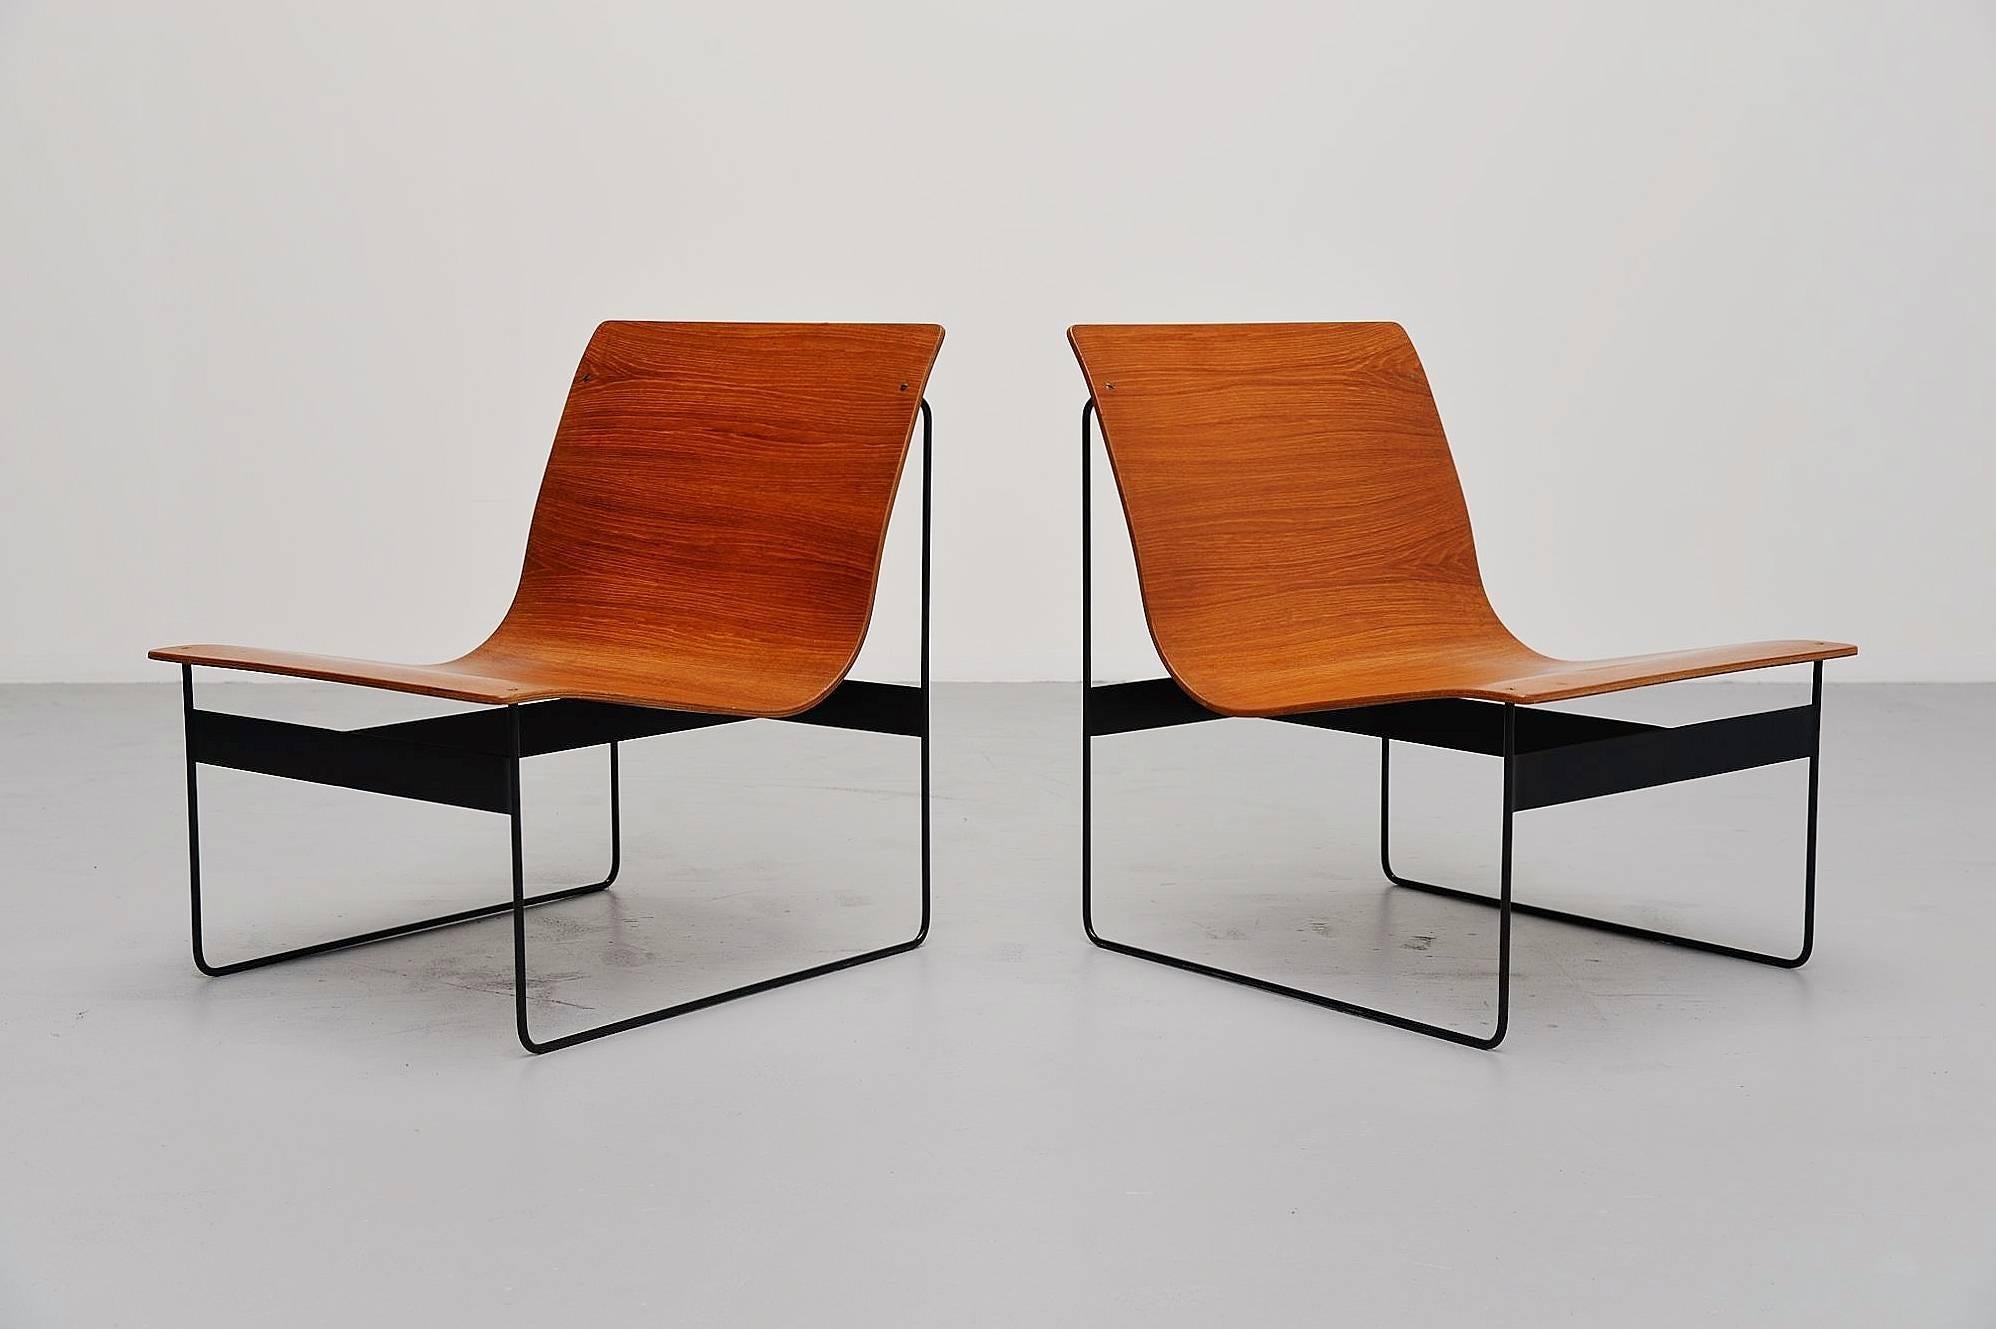 Amazing pair of lounge chairs designed by Günter Renkel for Rego, Germany, 1959. These chairs are made of teak plywood and have solid metal sophisticated sledge frames, black lacquered. The chairs have a very nice and warm grain to the wood and